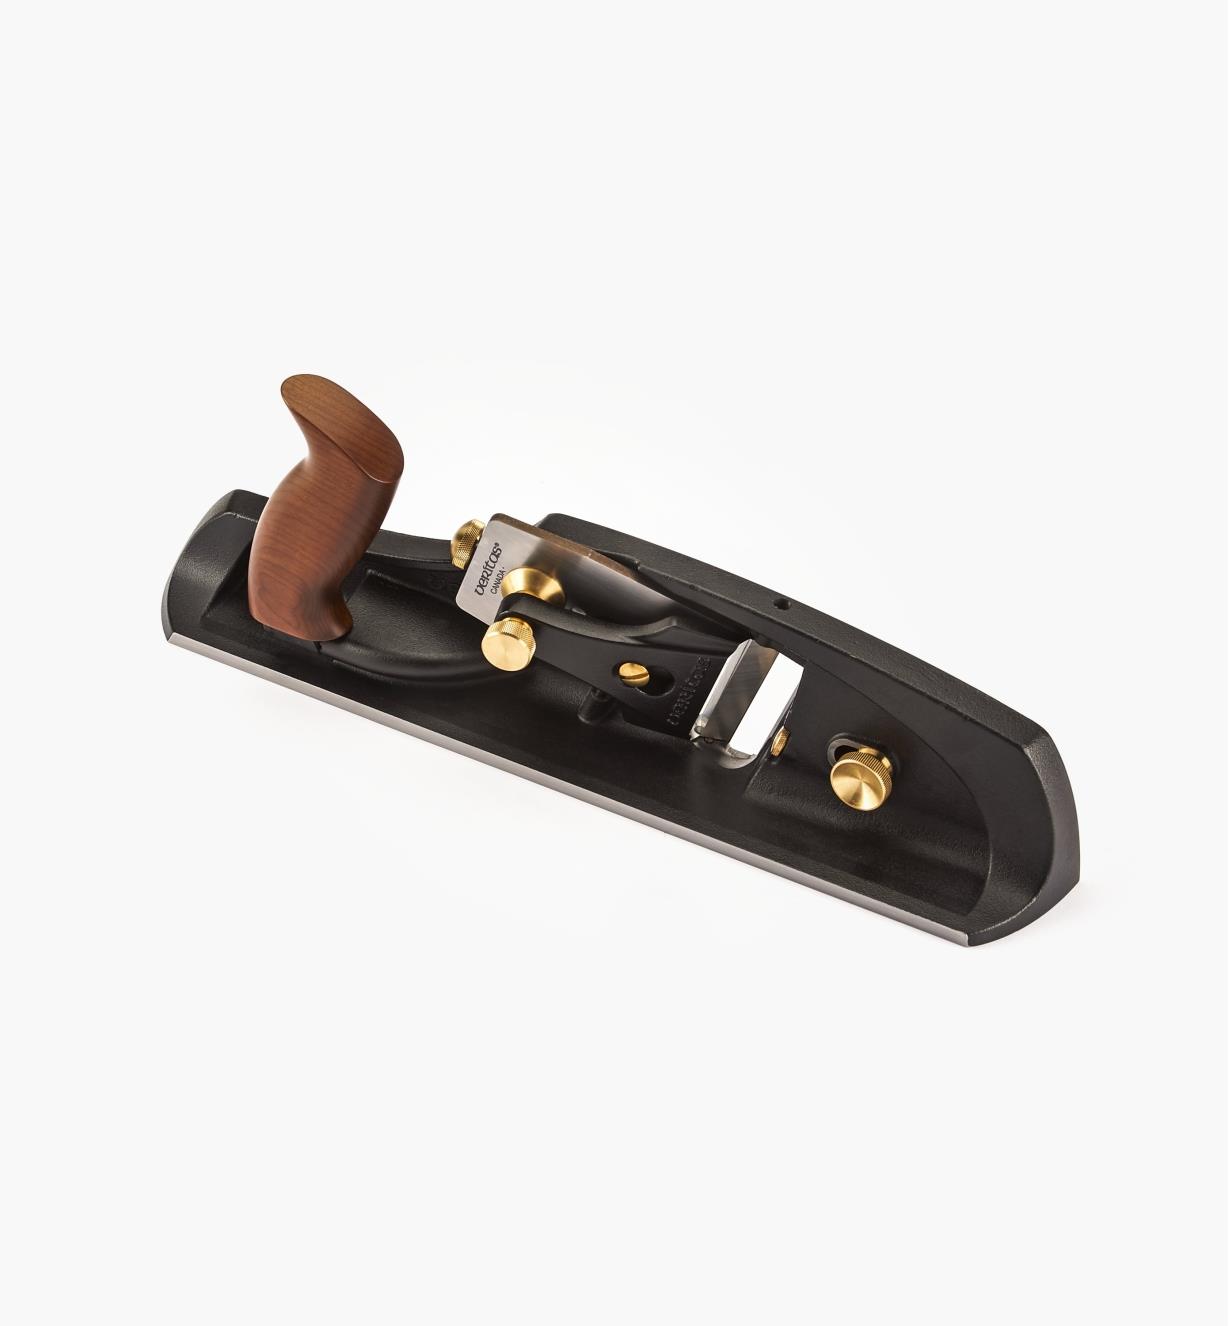 CM280P - Right-Hand Shooting Plane, PM-V11 – Manufacturing Second